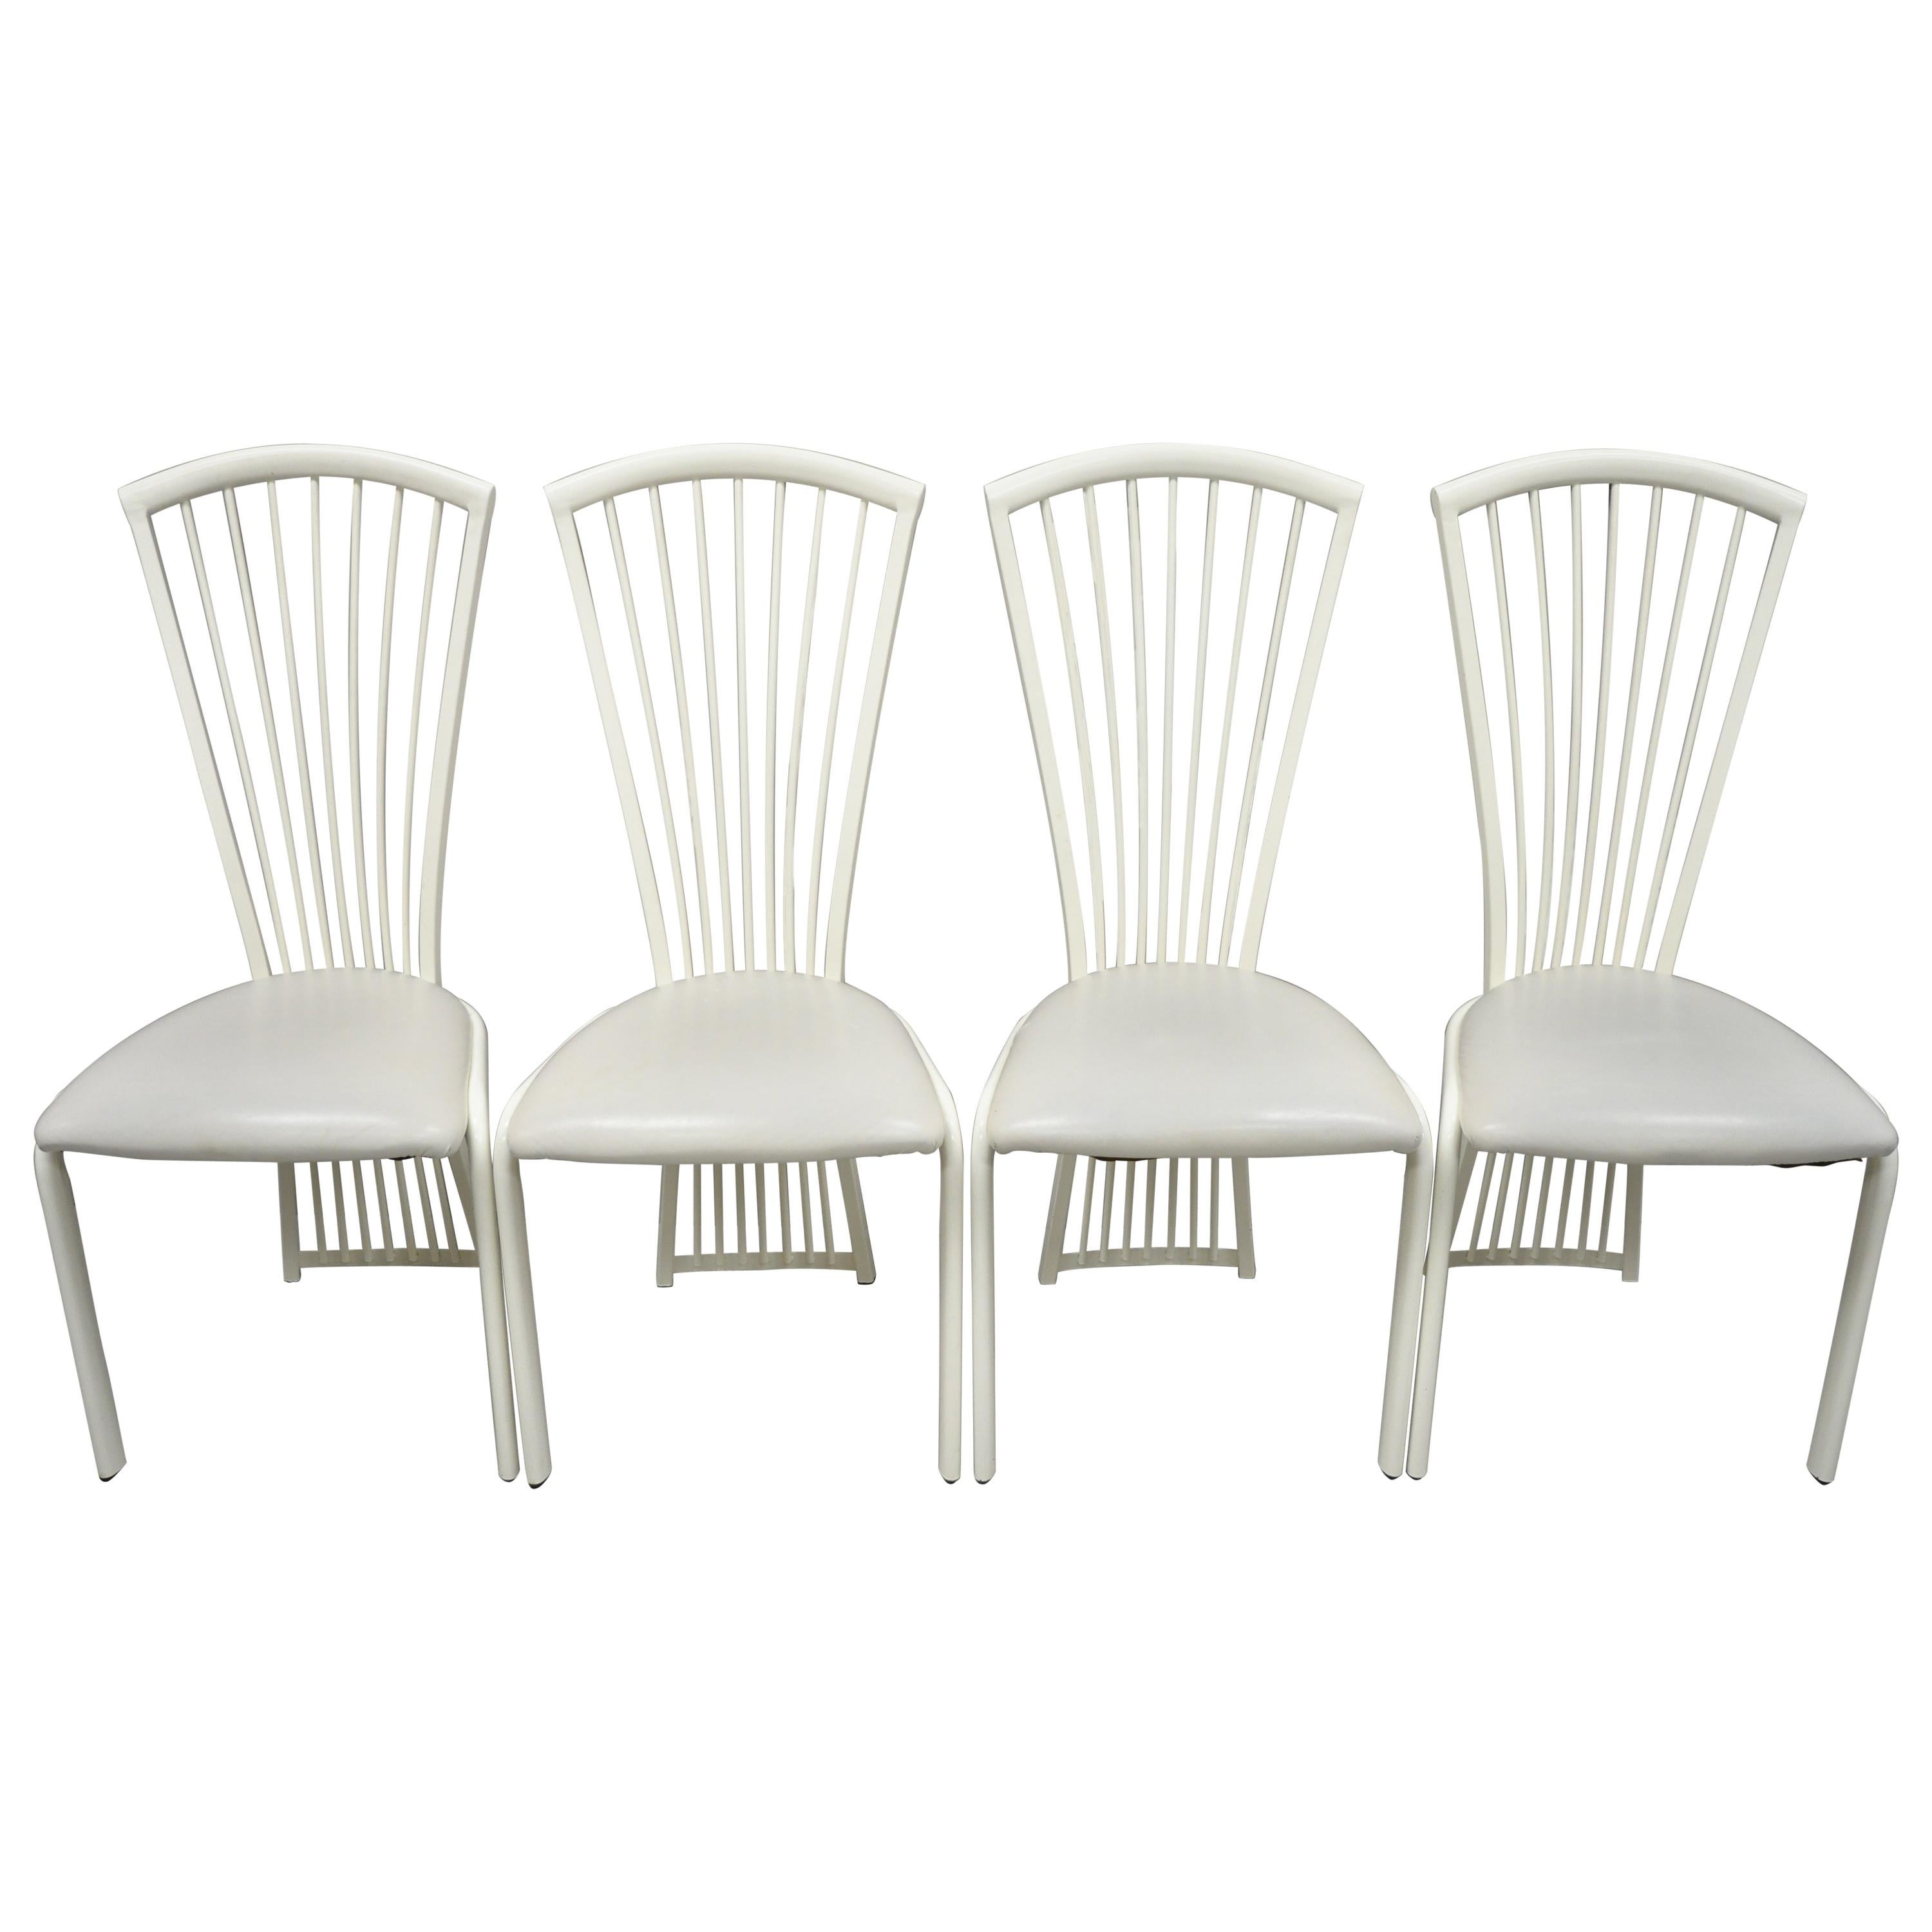 Set of Four Postmodern Art Deco Style Metal Fan Back Dining Chairs by Liberty For Sale